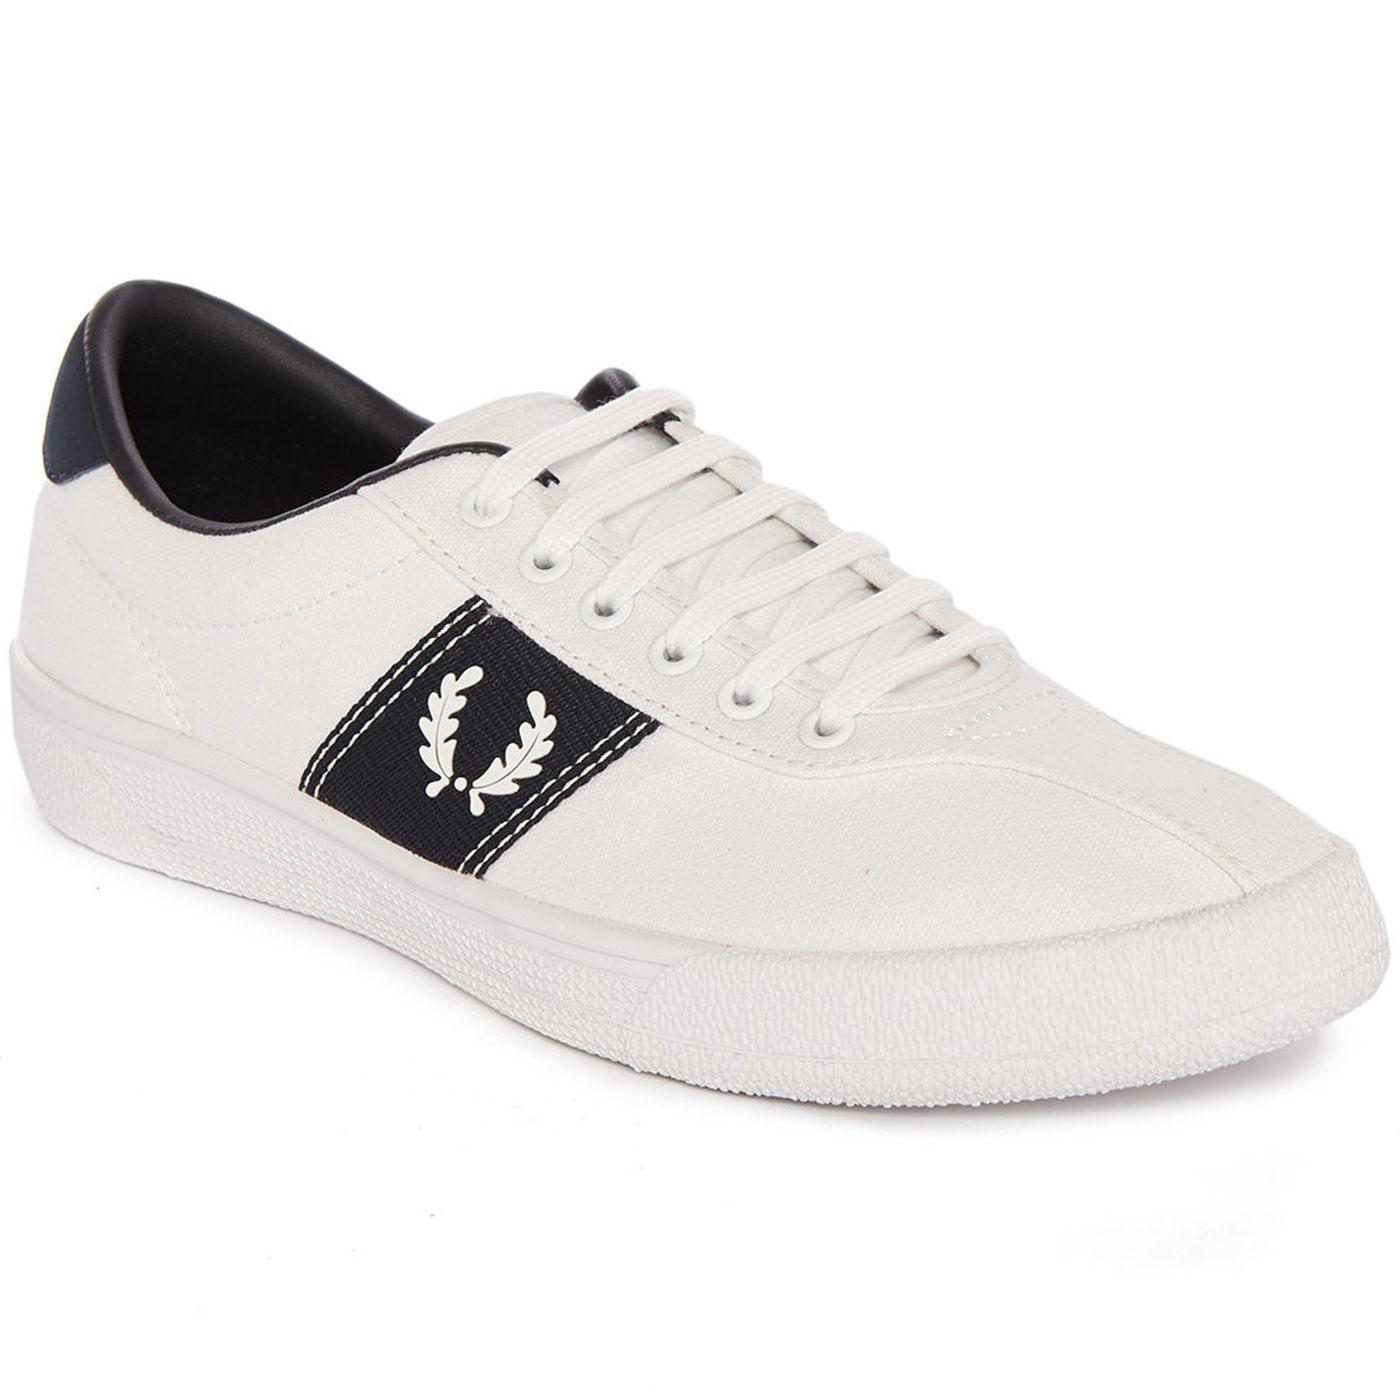 fred perry tennis shoes